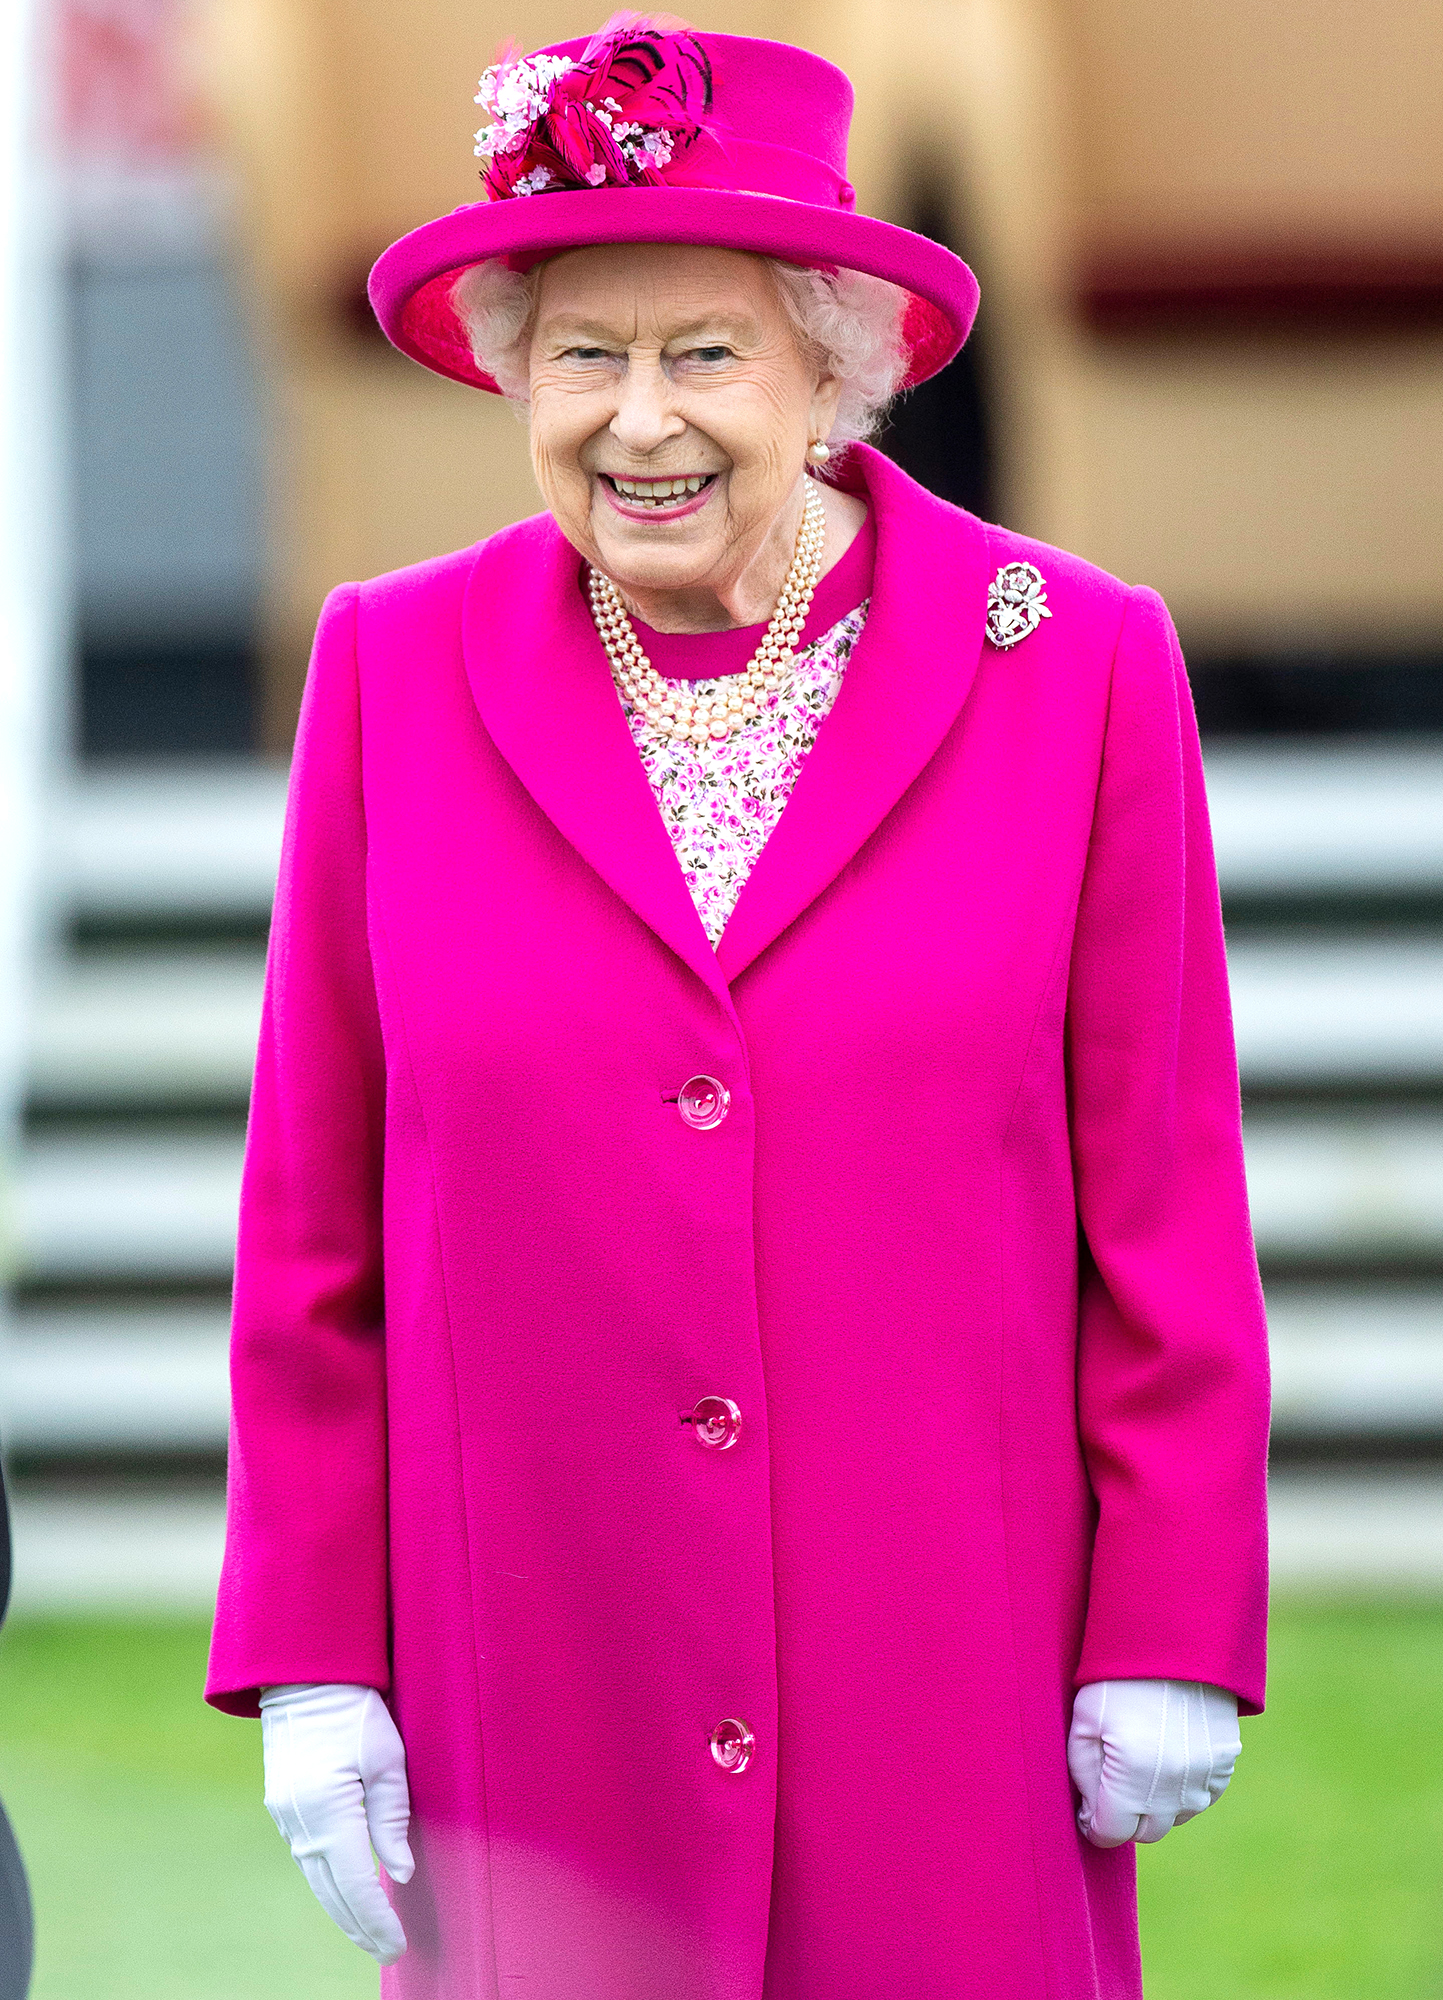 Queen-Elizabeth-II-Was-One-of-the-First-People-to-Know-About-Lilis-Birth.jpg